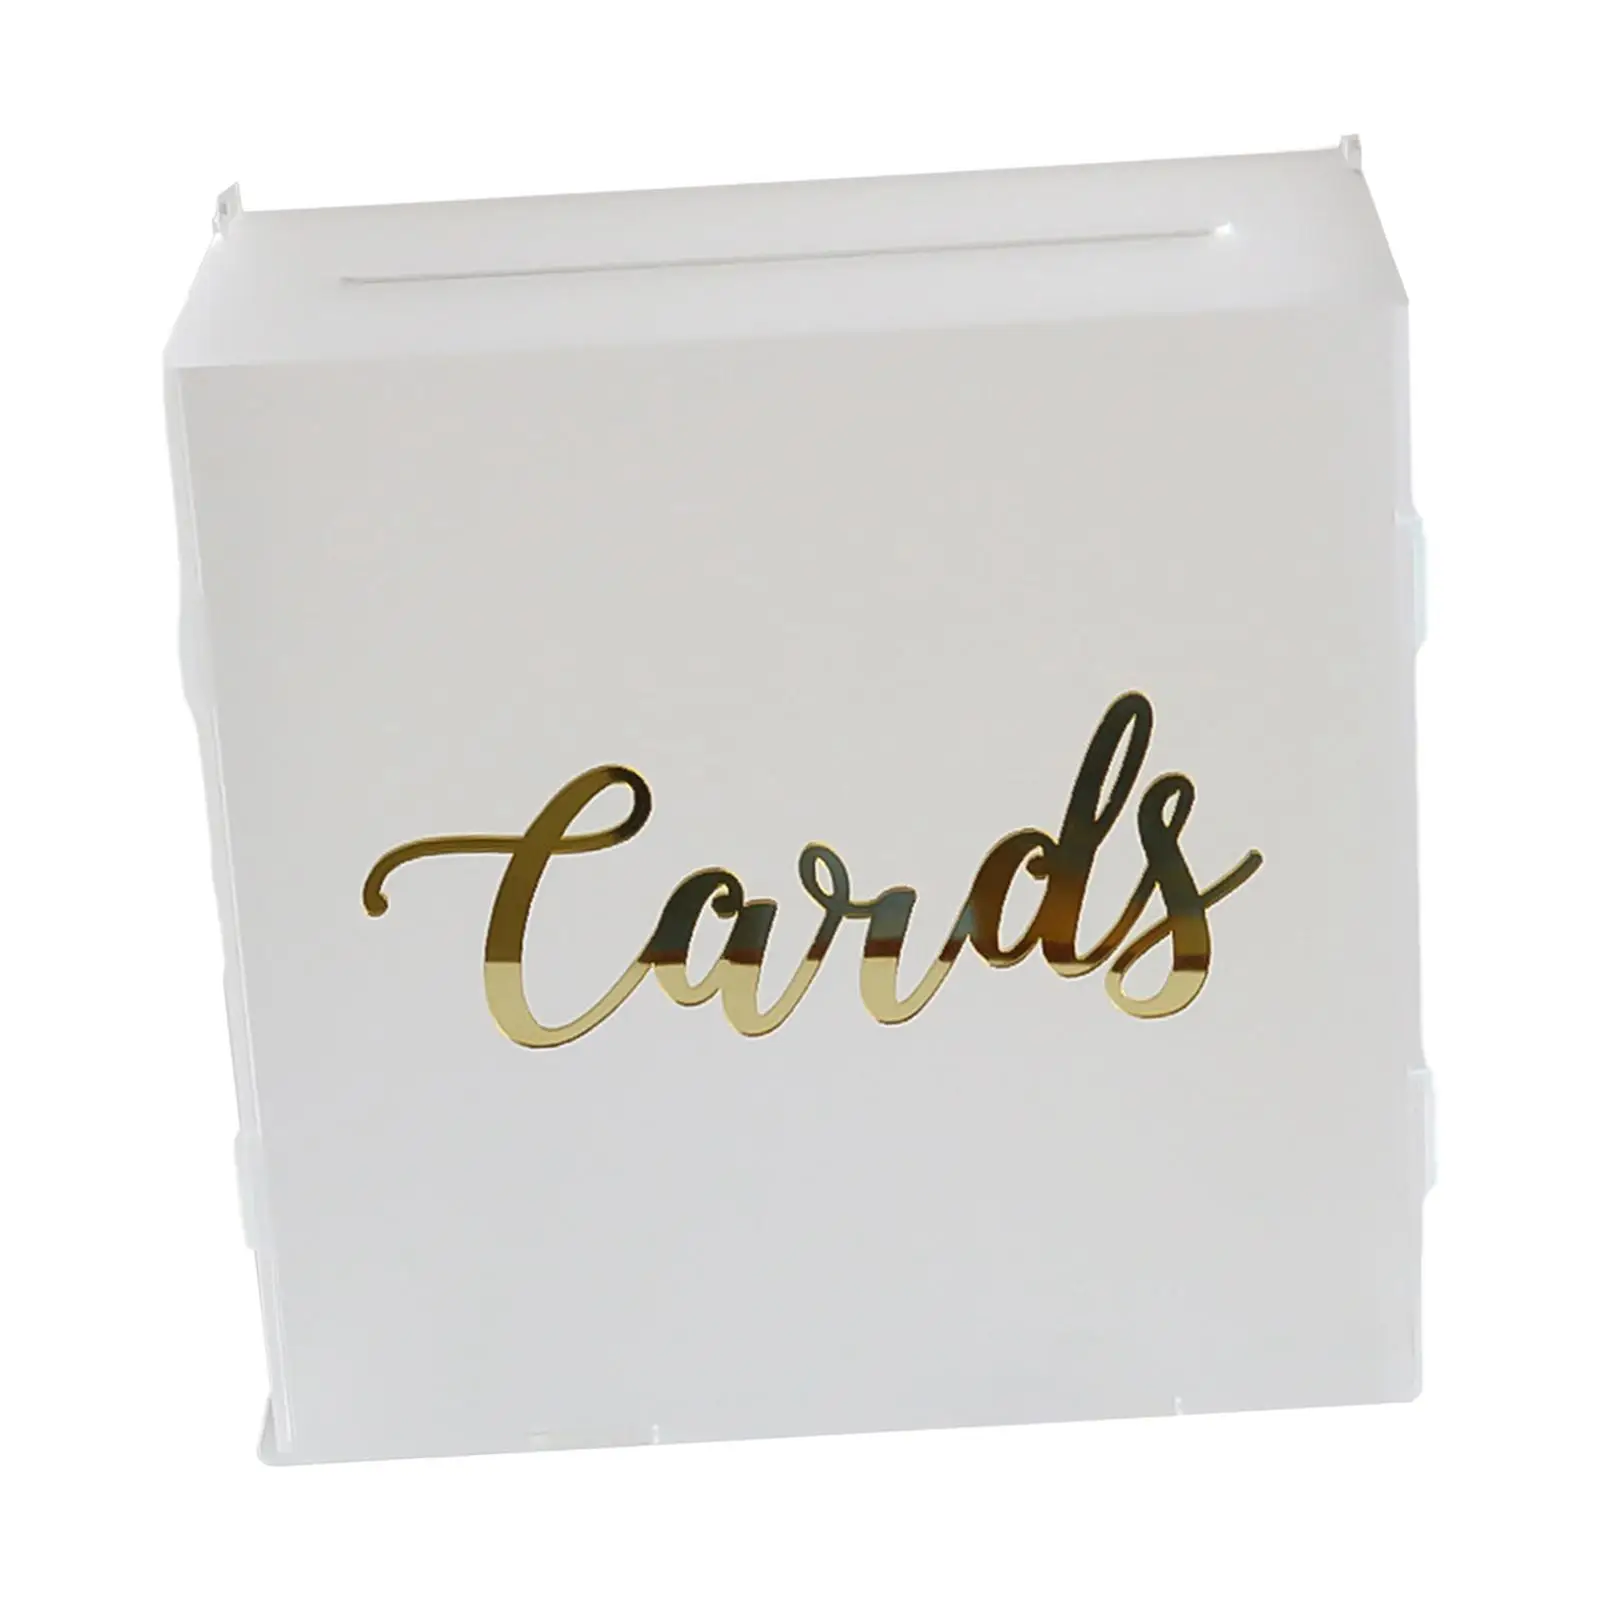 Wedding Envelope Boxes Party Favors Acrylic Wedding Cards Box Envelop Card Box for Party Wedding Anniversary Birthday Decoration